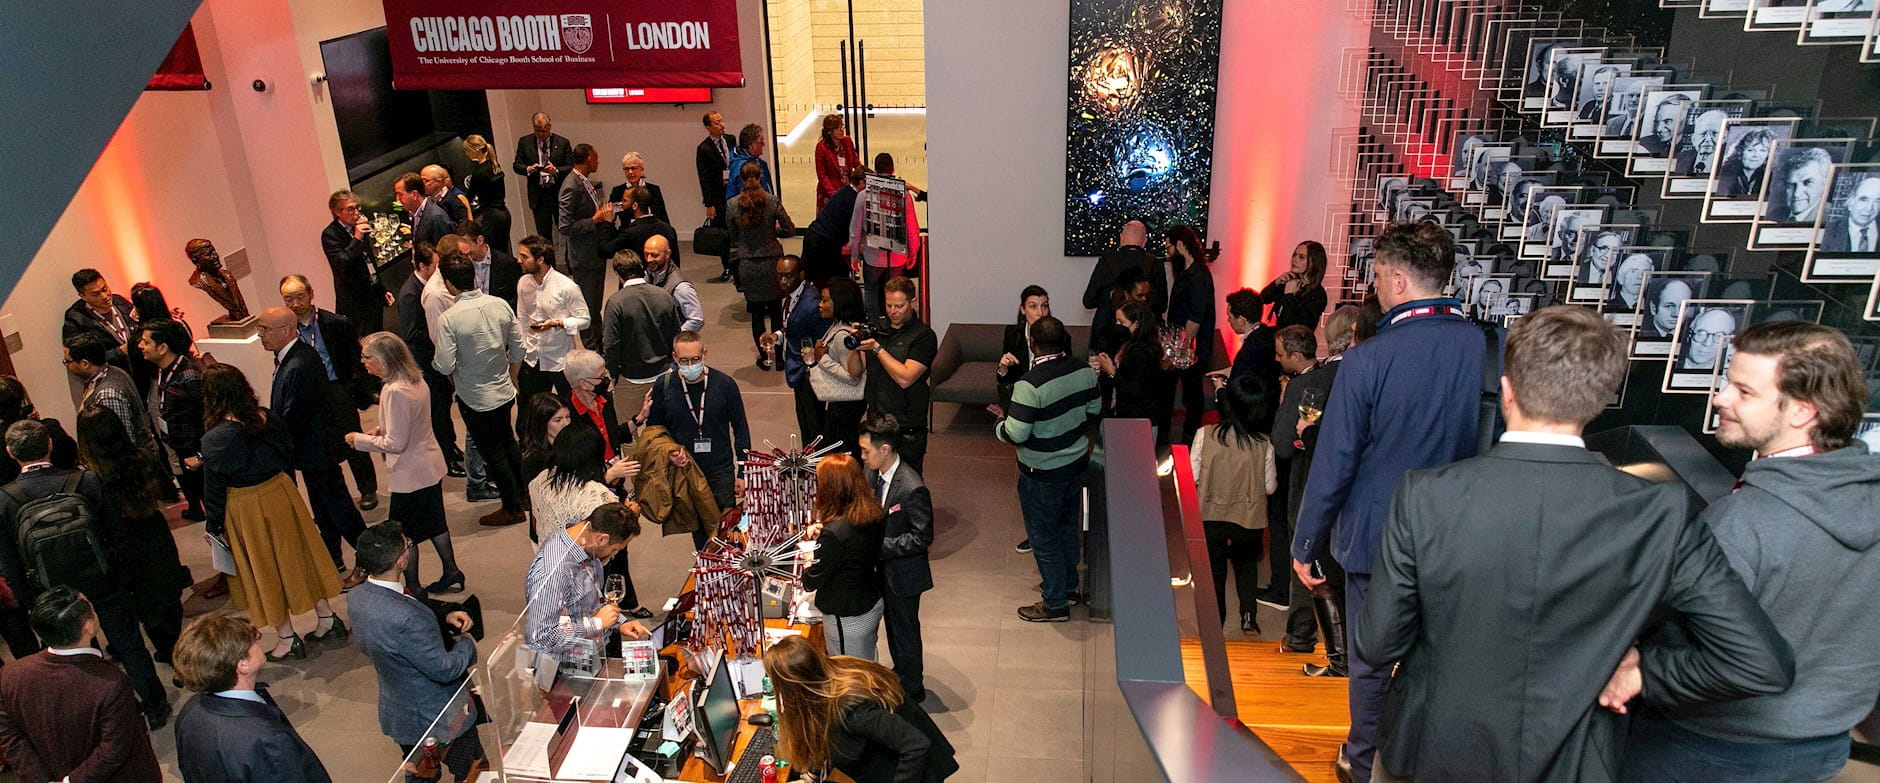 Atrium of the Chicago Booth London Campus full of people during the grand opening